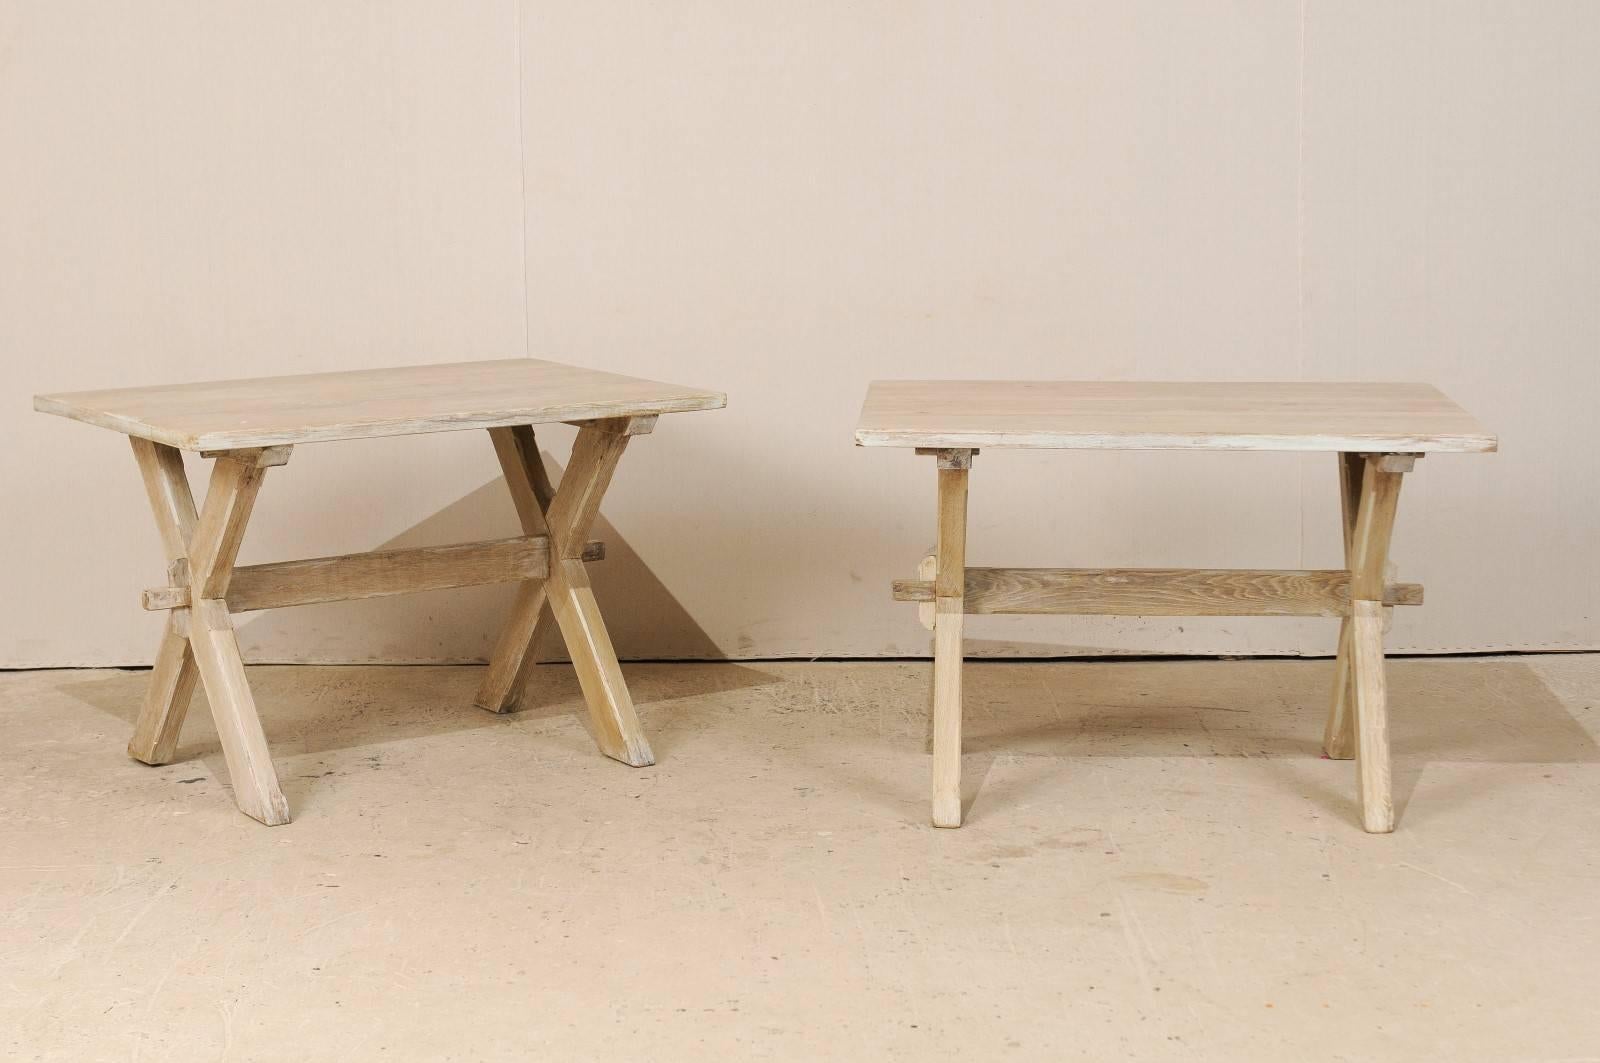 A pair of French Mid-Century side or accent tables. This pair of French wood tables features clean simple lines with the crossed or X-style legs. The tables from the mid-20th century are a natural finish with lighter cream accent trim paint. This